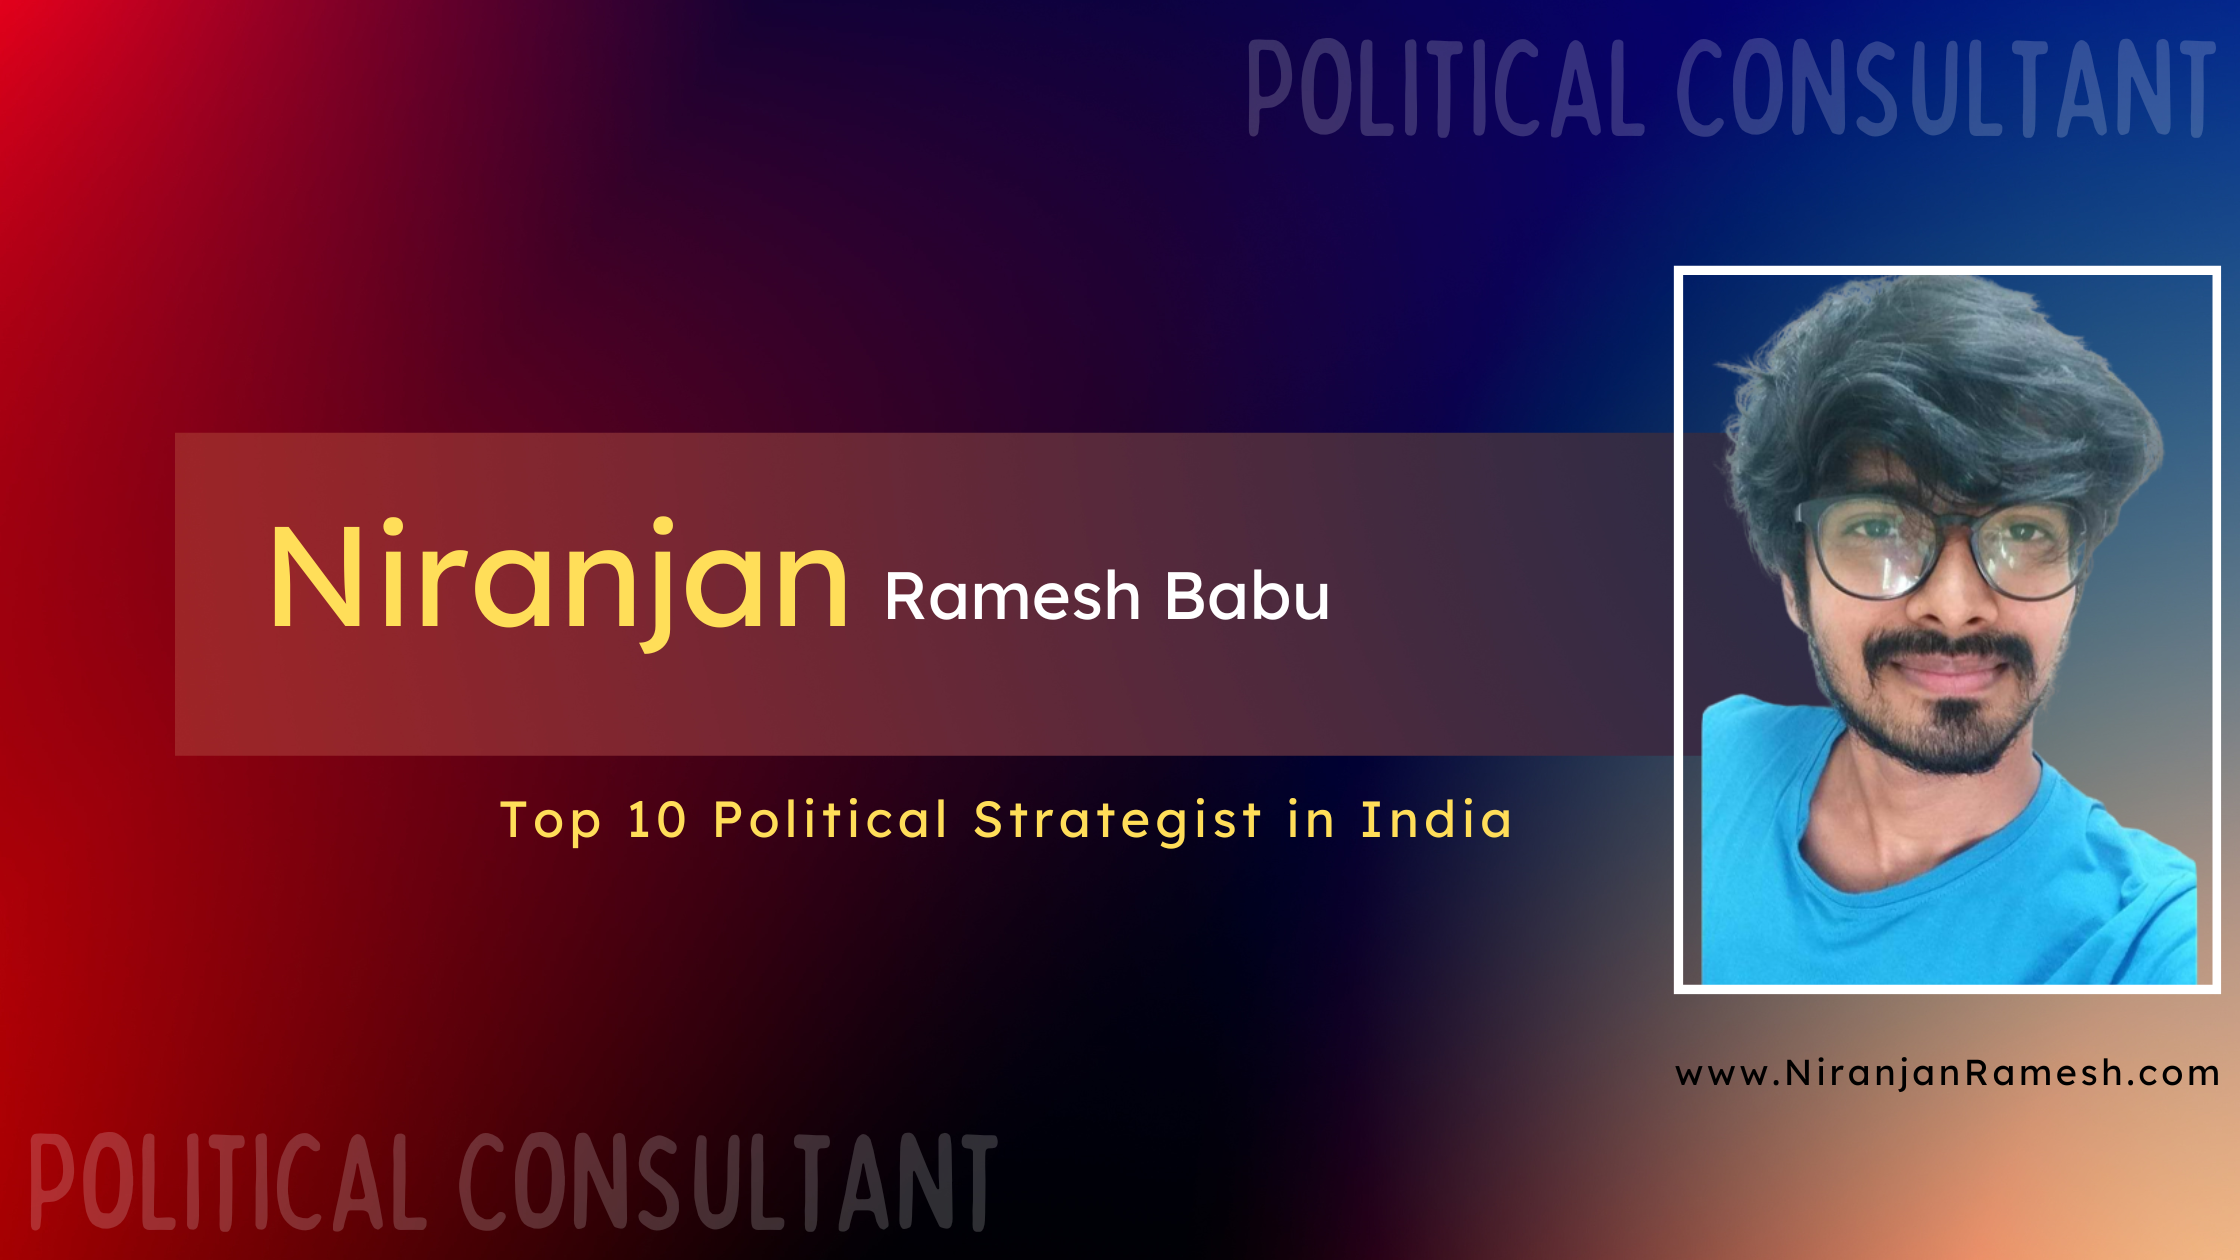 Top 10 Political Strategist in India